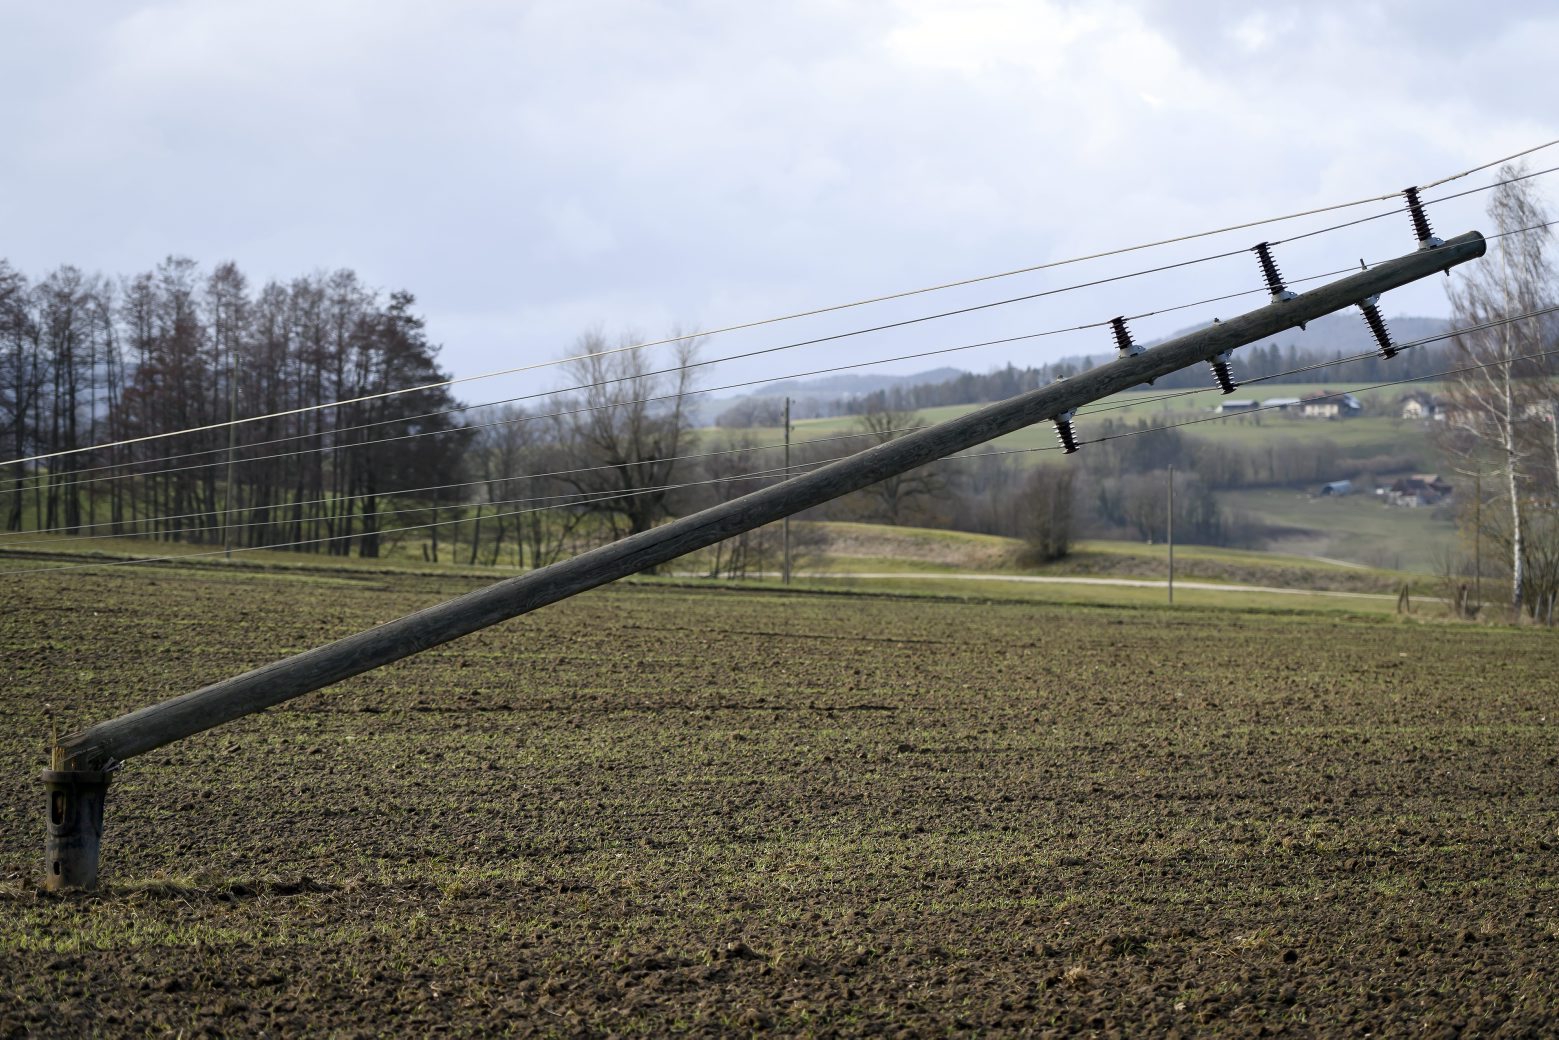 Power lines is lying in a field during the storm Ciara in Courtetelle, Switzerland, Monday, February 10, 2020. Severe warnings have been issued for Western and Northern Europe as storm Ciara (also known as Sabine in Germany, and Switzerland and Elsa in Norway) is bringing strong winds and heavy rains causing disruption of land and air traffic. Winter storm Ciara reached Switzerland last night. (KEYSTONE/Anthony Anex) SWITZERLAND WEATHER STORM CIARA